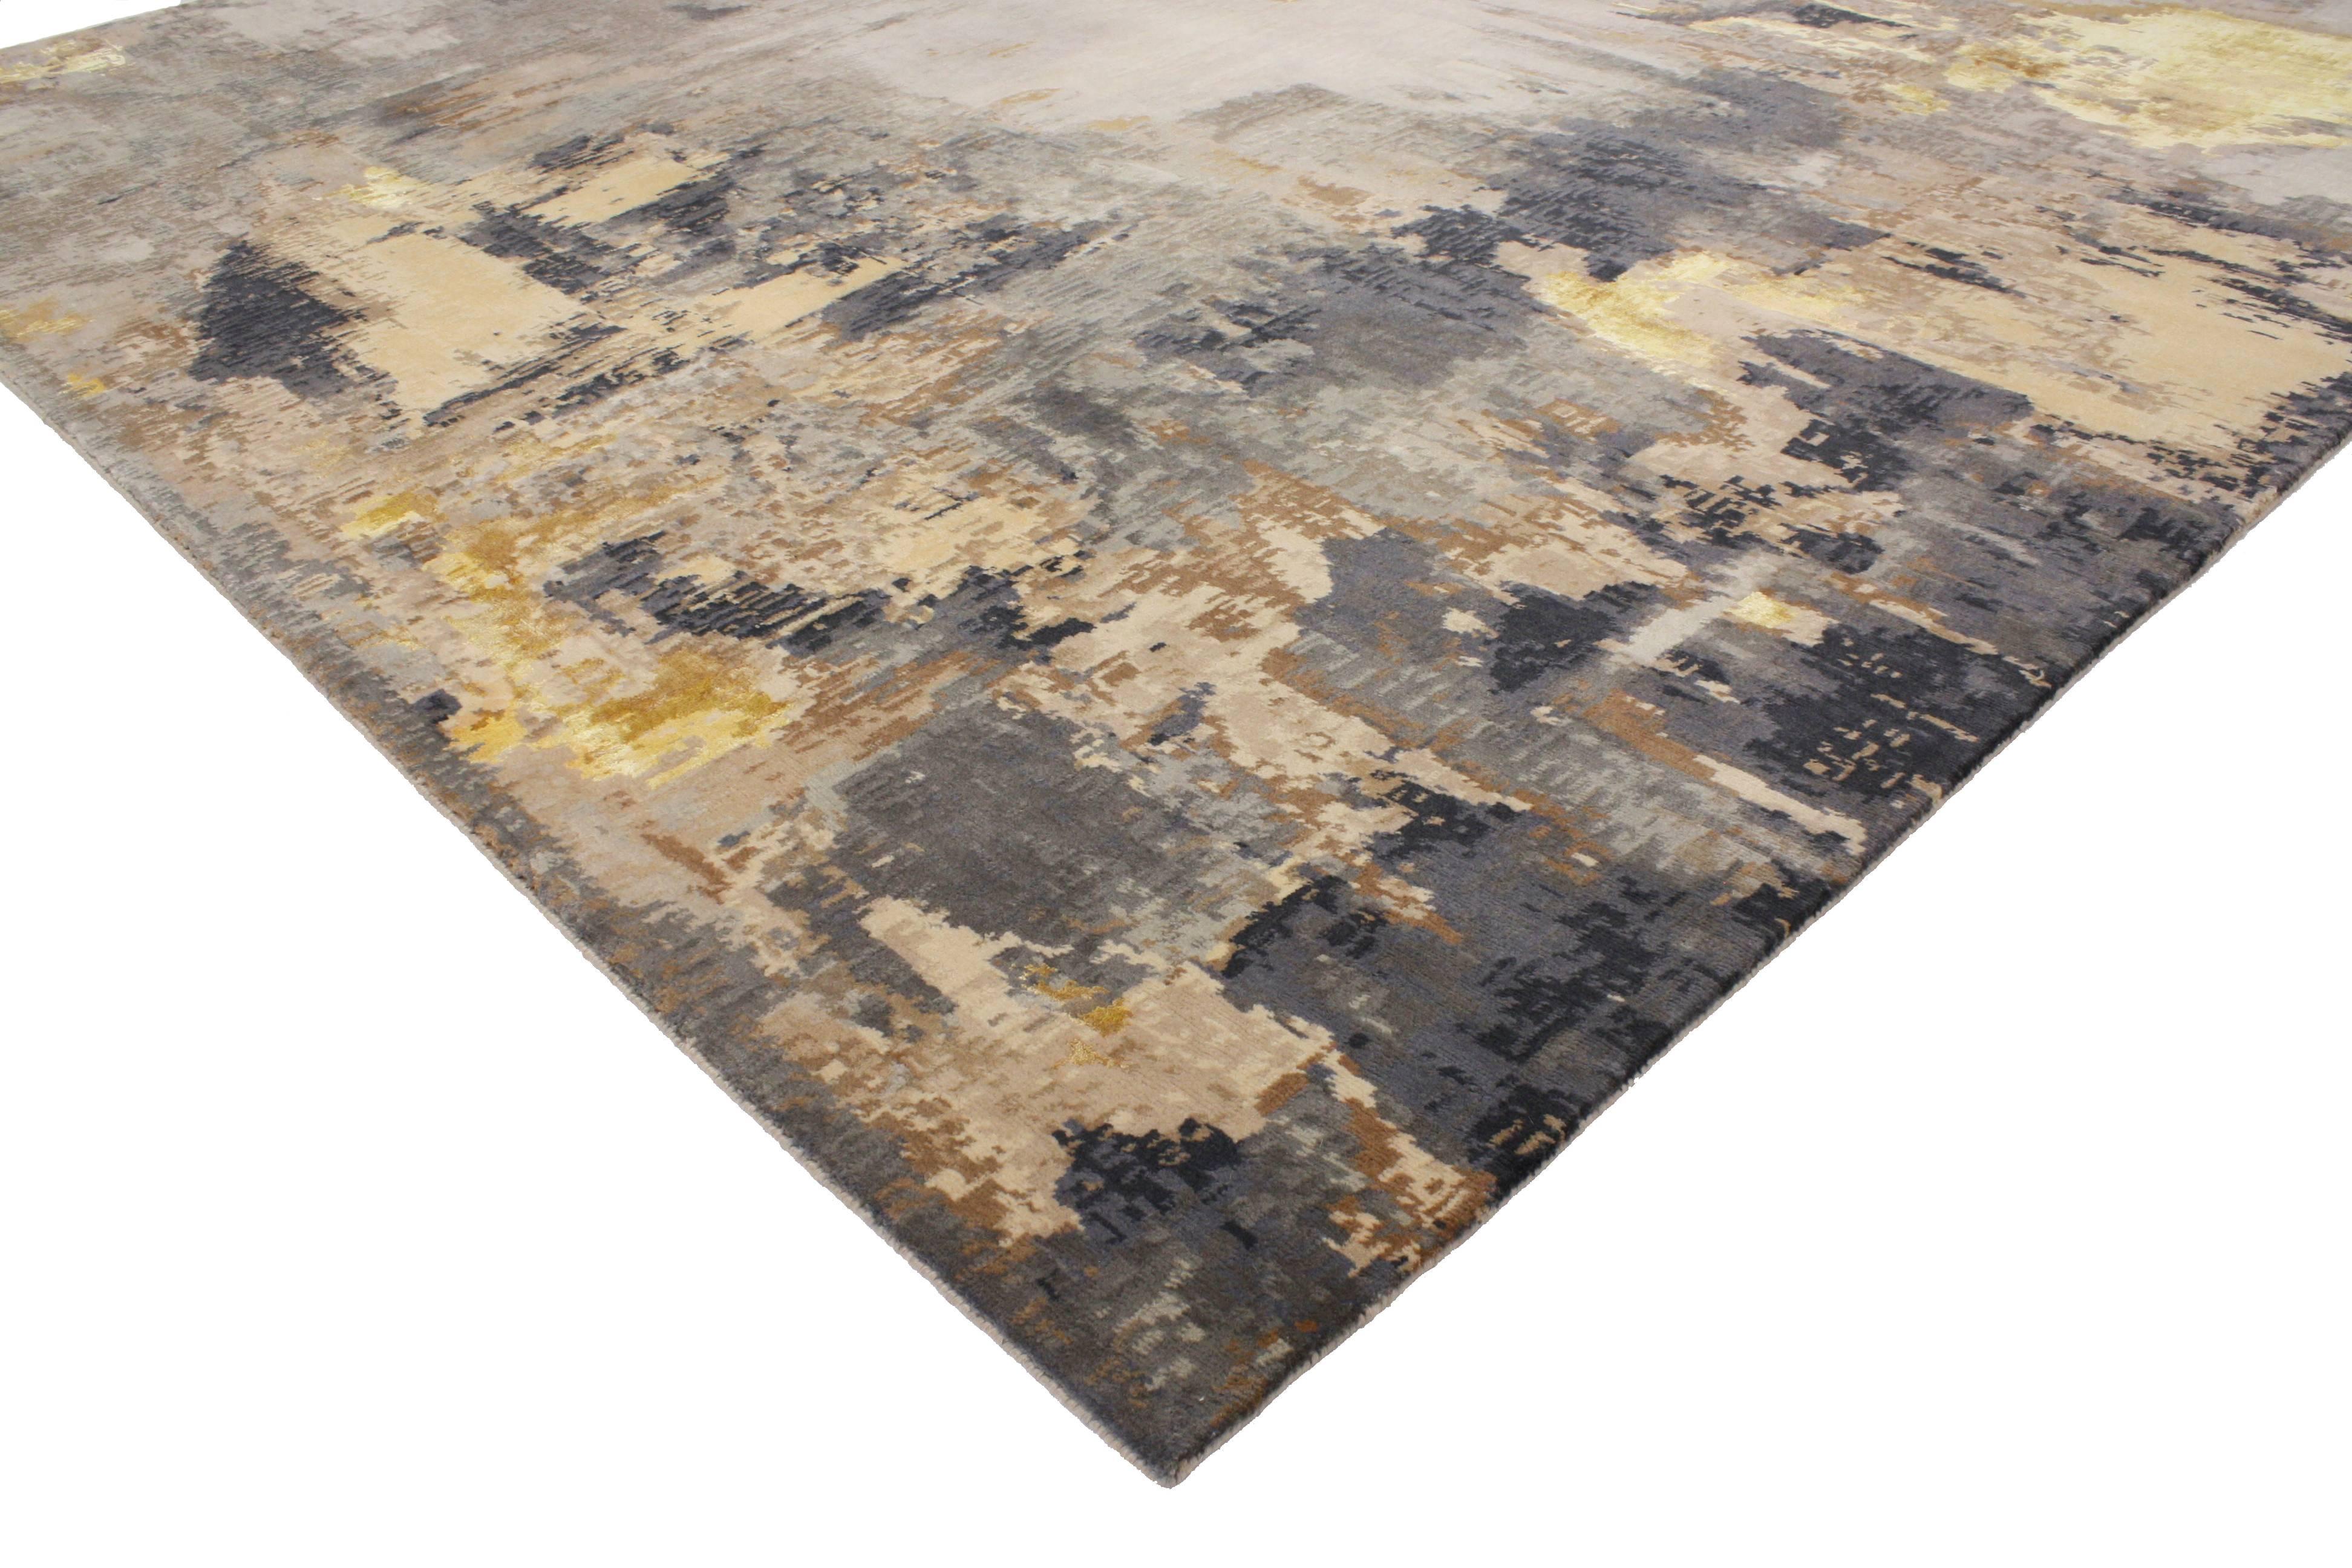 30311 New Contemporary Area Rug with Abstract Expressionist Grunge Art Style. This hand knotted wool and silk contemporary area rug showcases an abstract expressionist work of art with bold color contrasts with plenty of neutral and grayscale